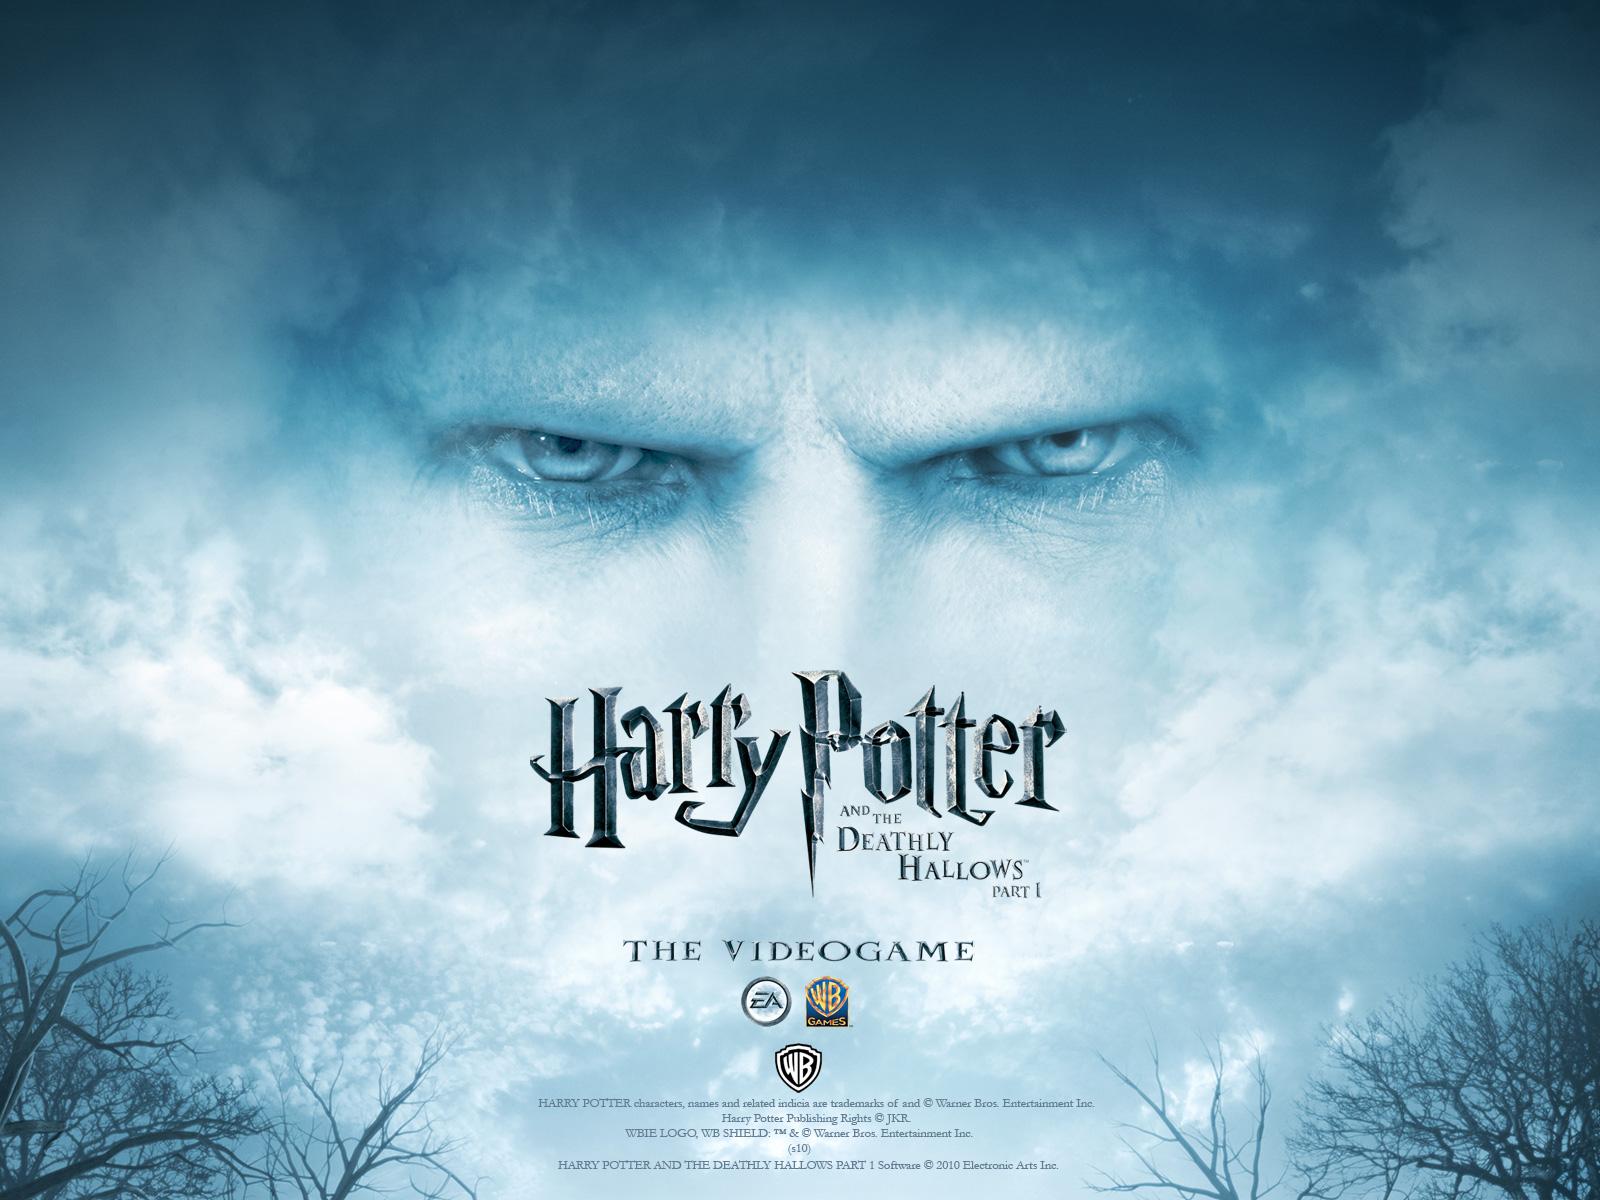 Harry Potter and the Deathly Hallows: Part 1 videogame wallpaper